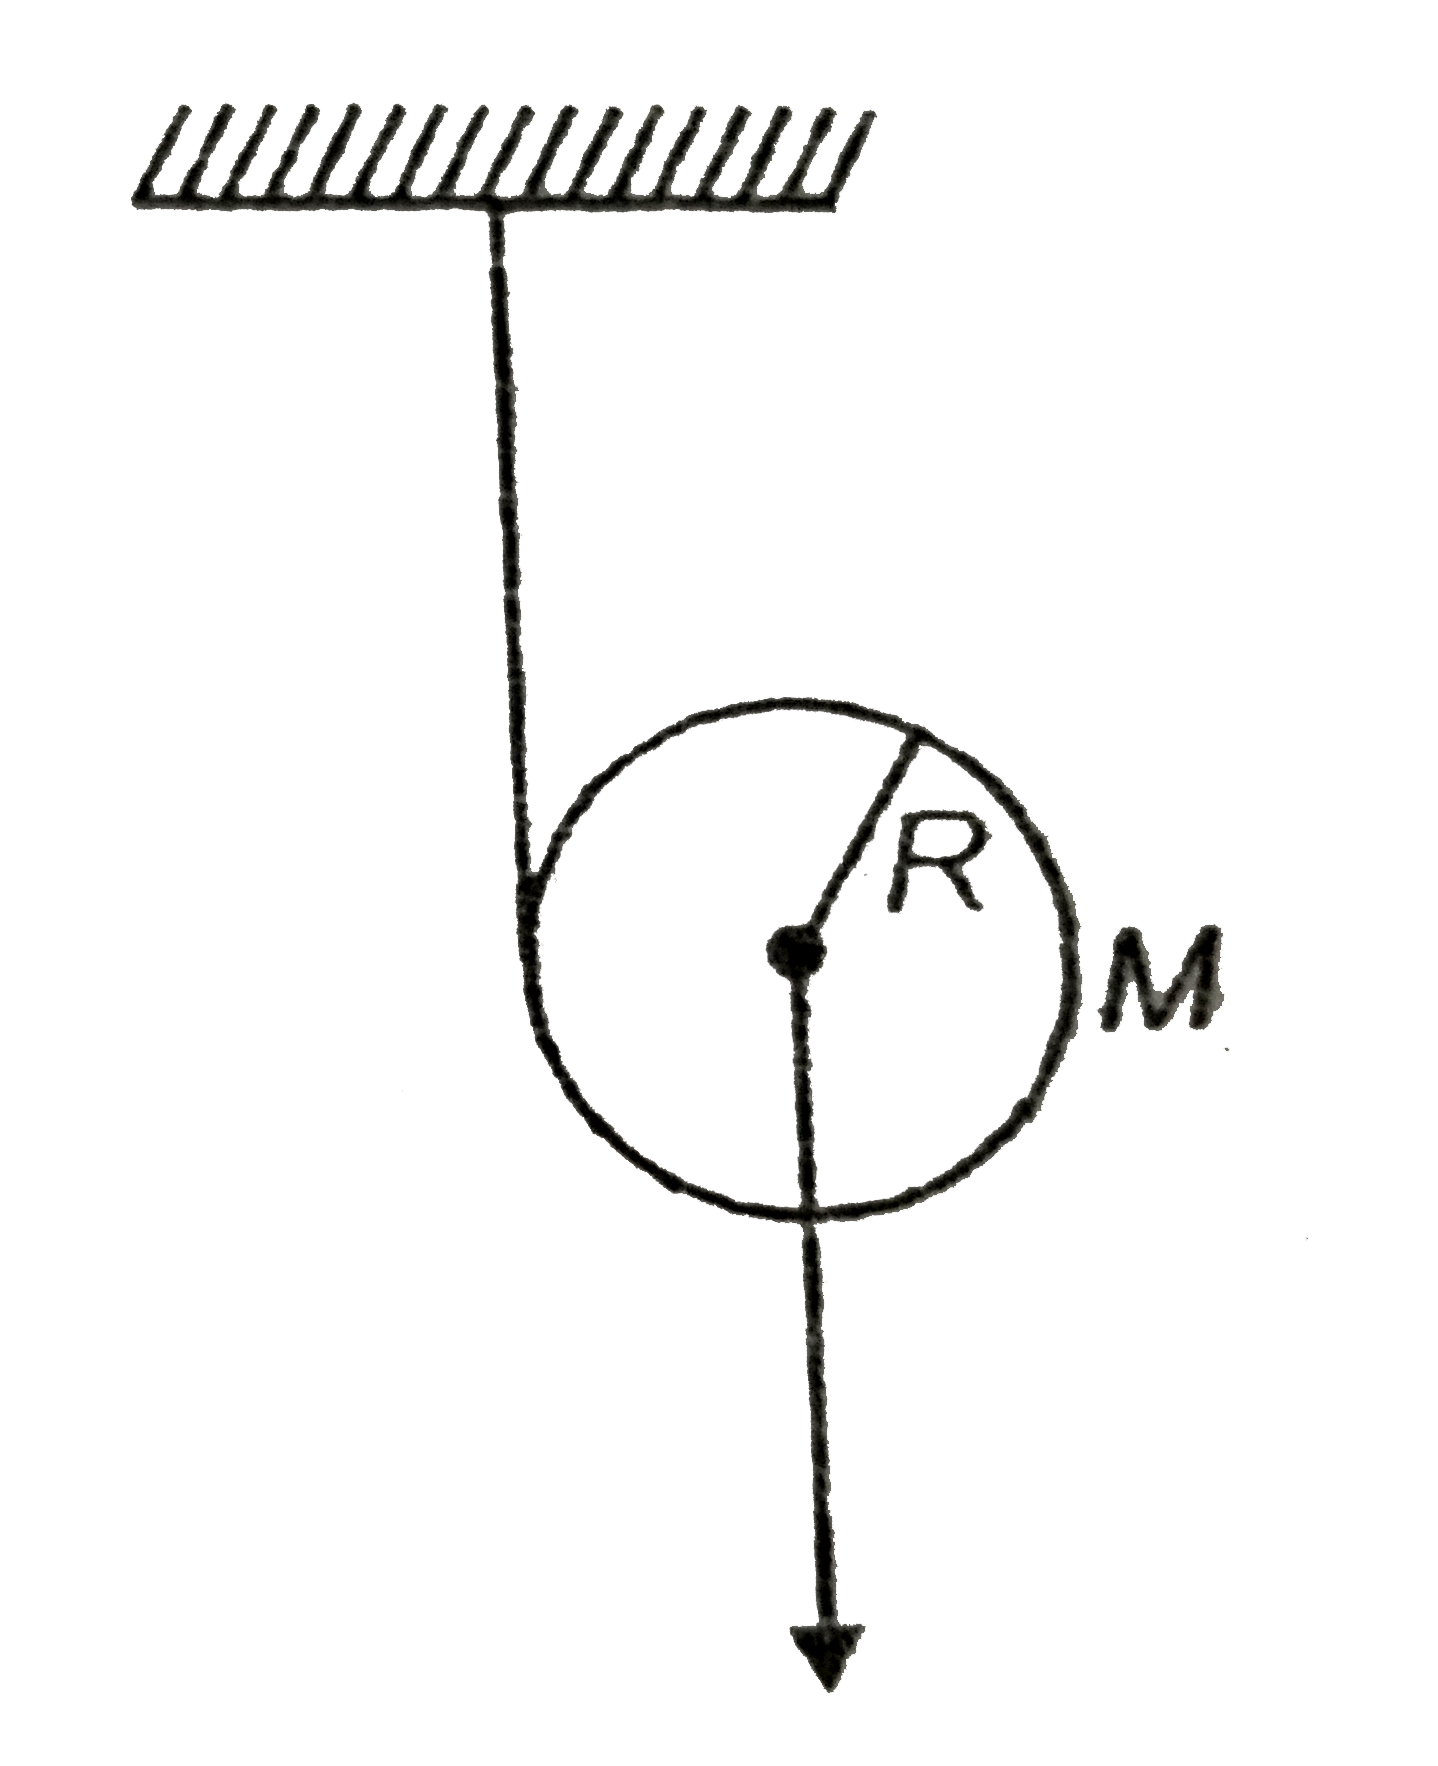 A disc of mass M has a light, thin string wrapped several times around